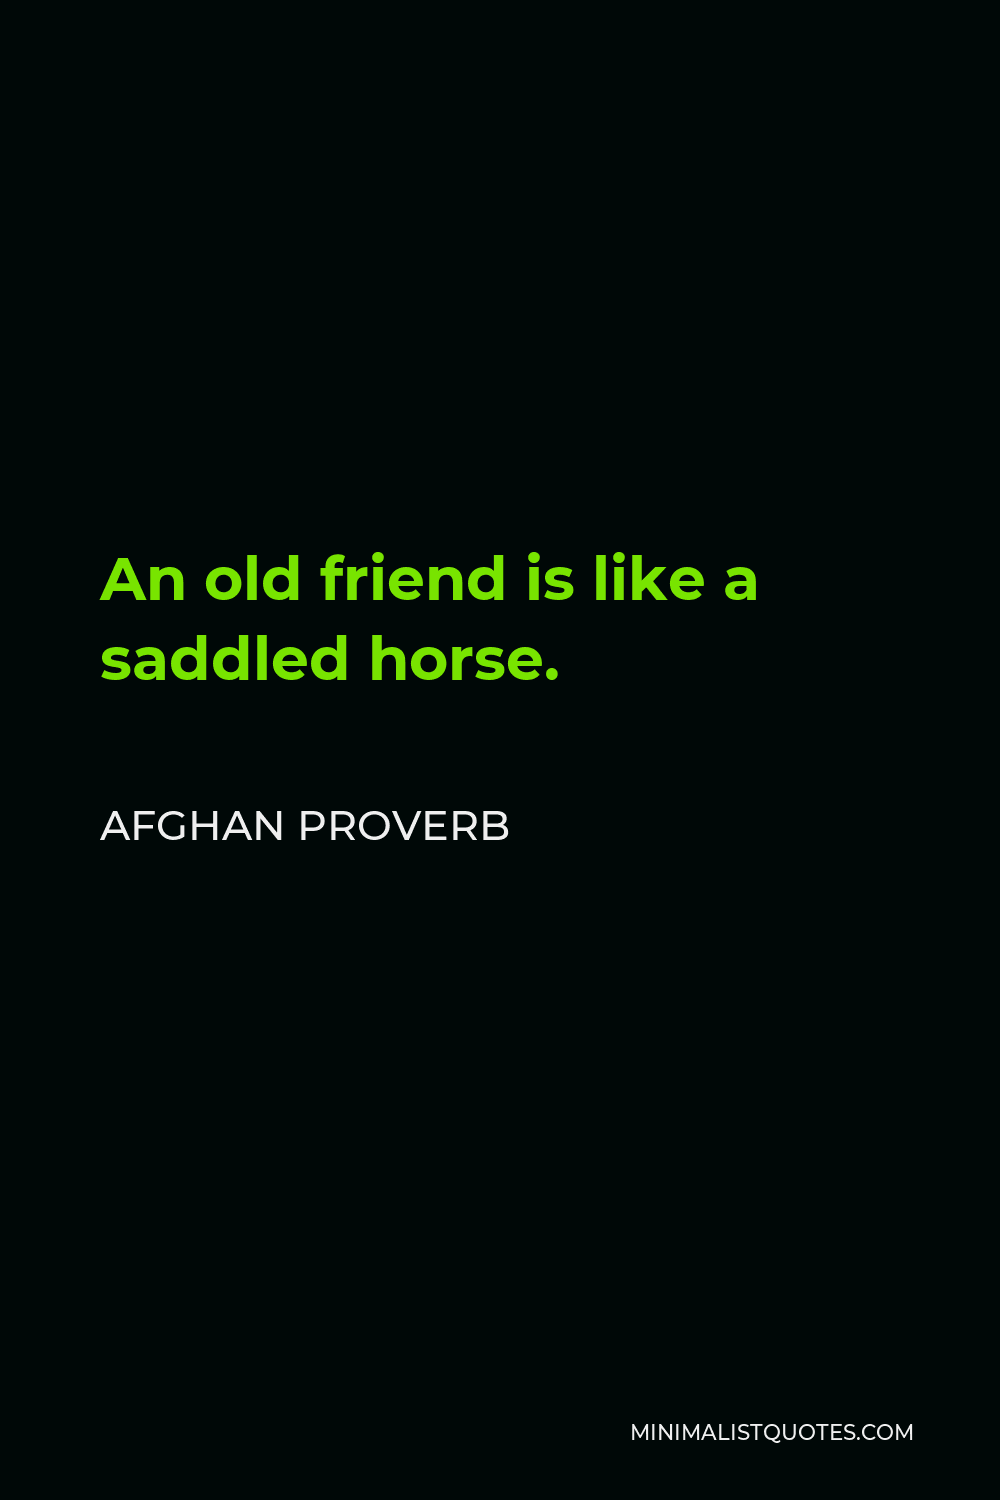 Afghan Proverb Quote - An old friend is like a saddled horse.